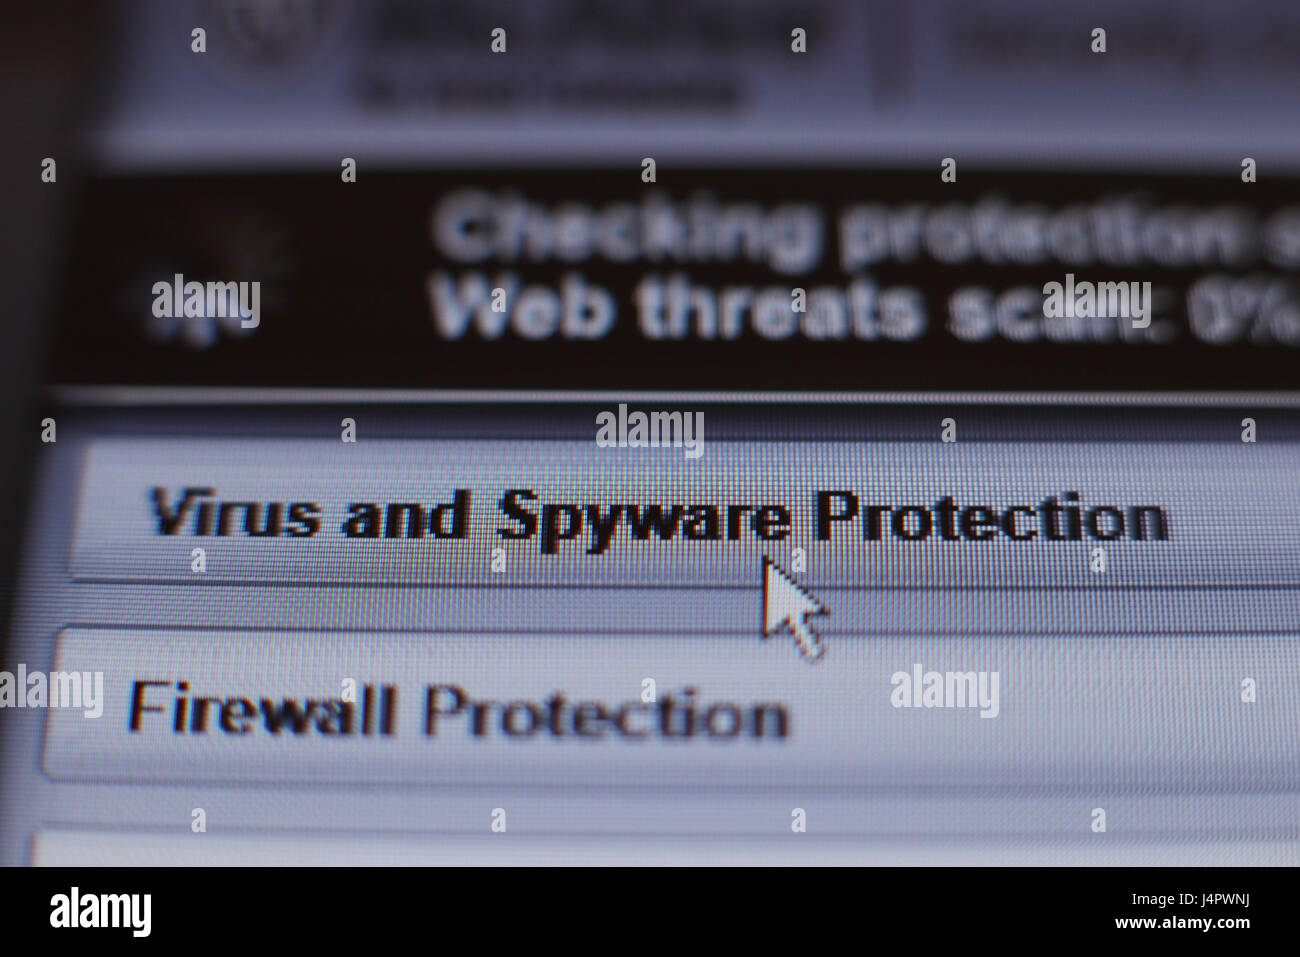 Internet security software performing an anti-virus and anti-spyware scan on a laptop, after the NHS has been hit by a major cyber attack on its computer systems. Stock Photo